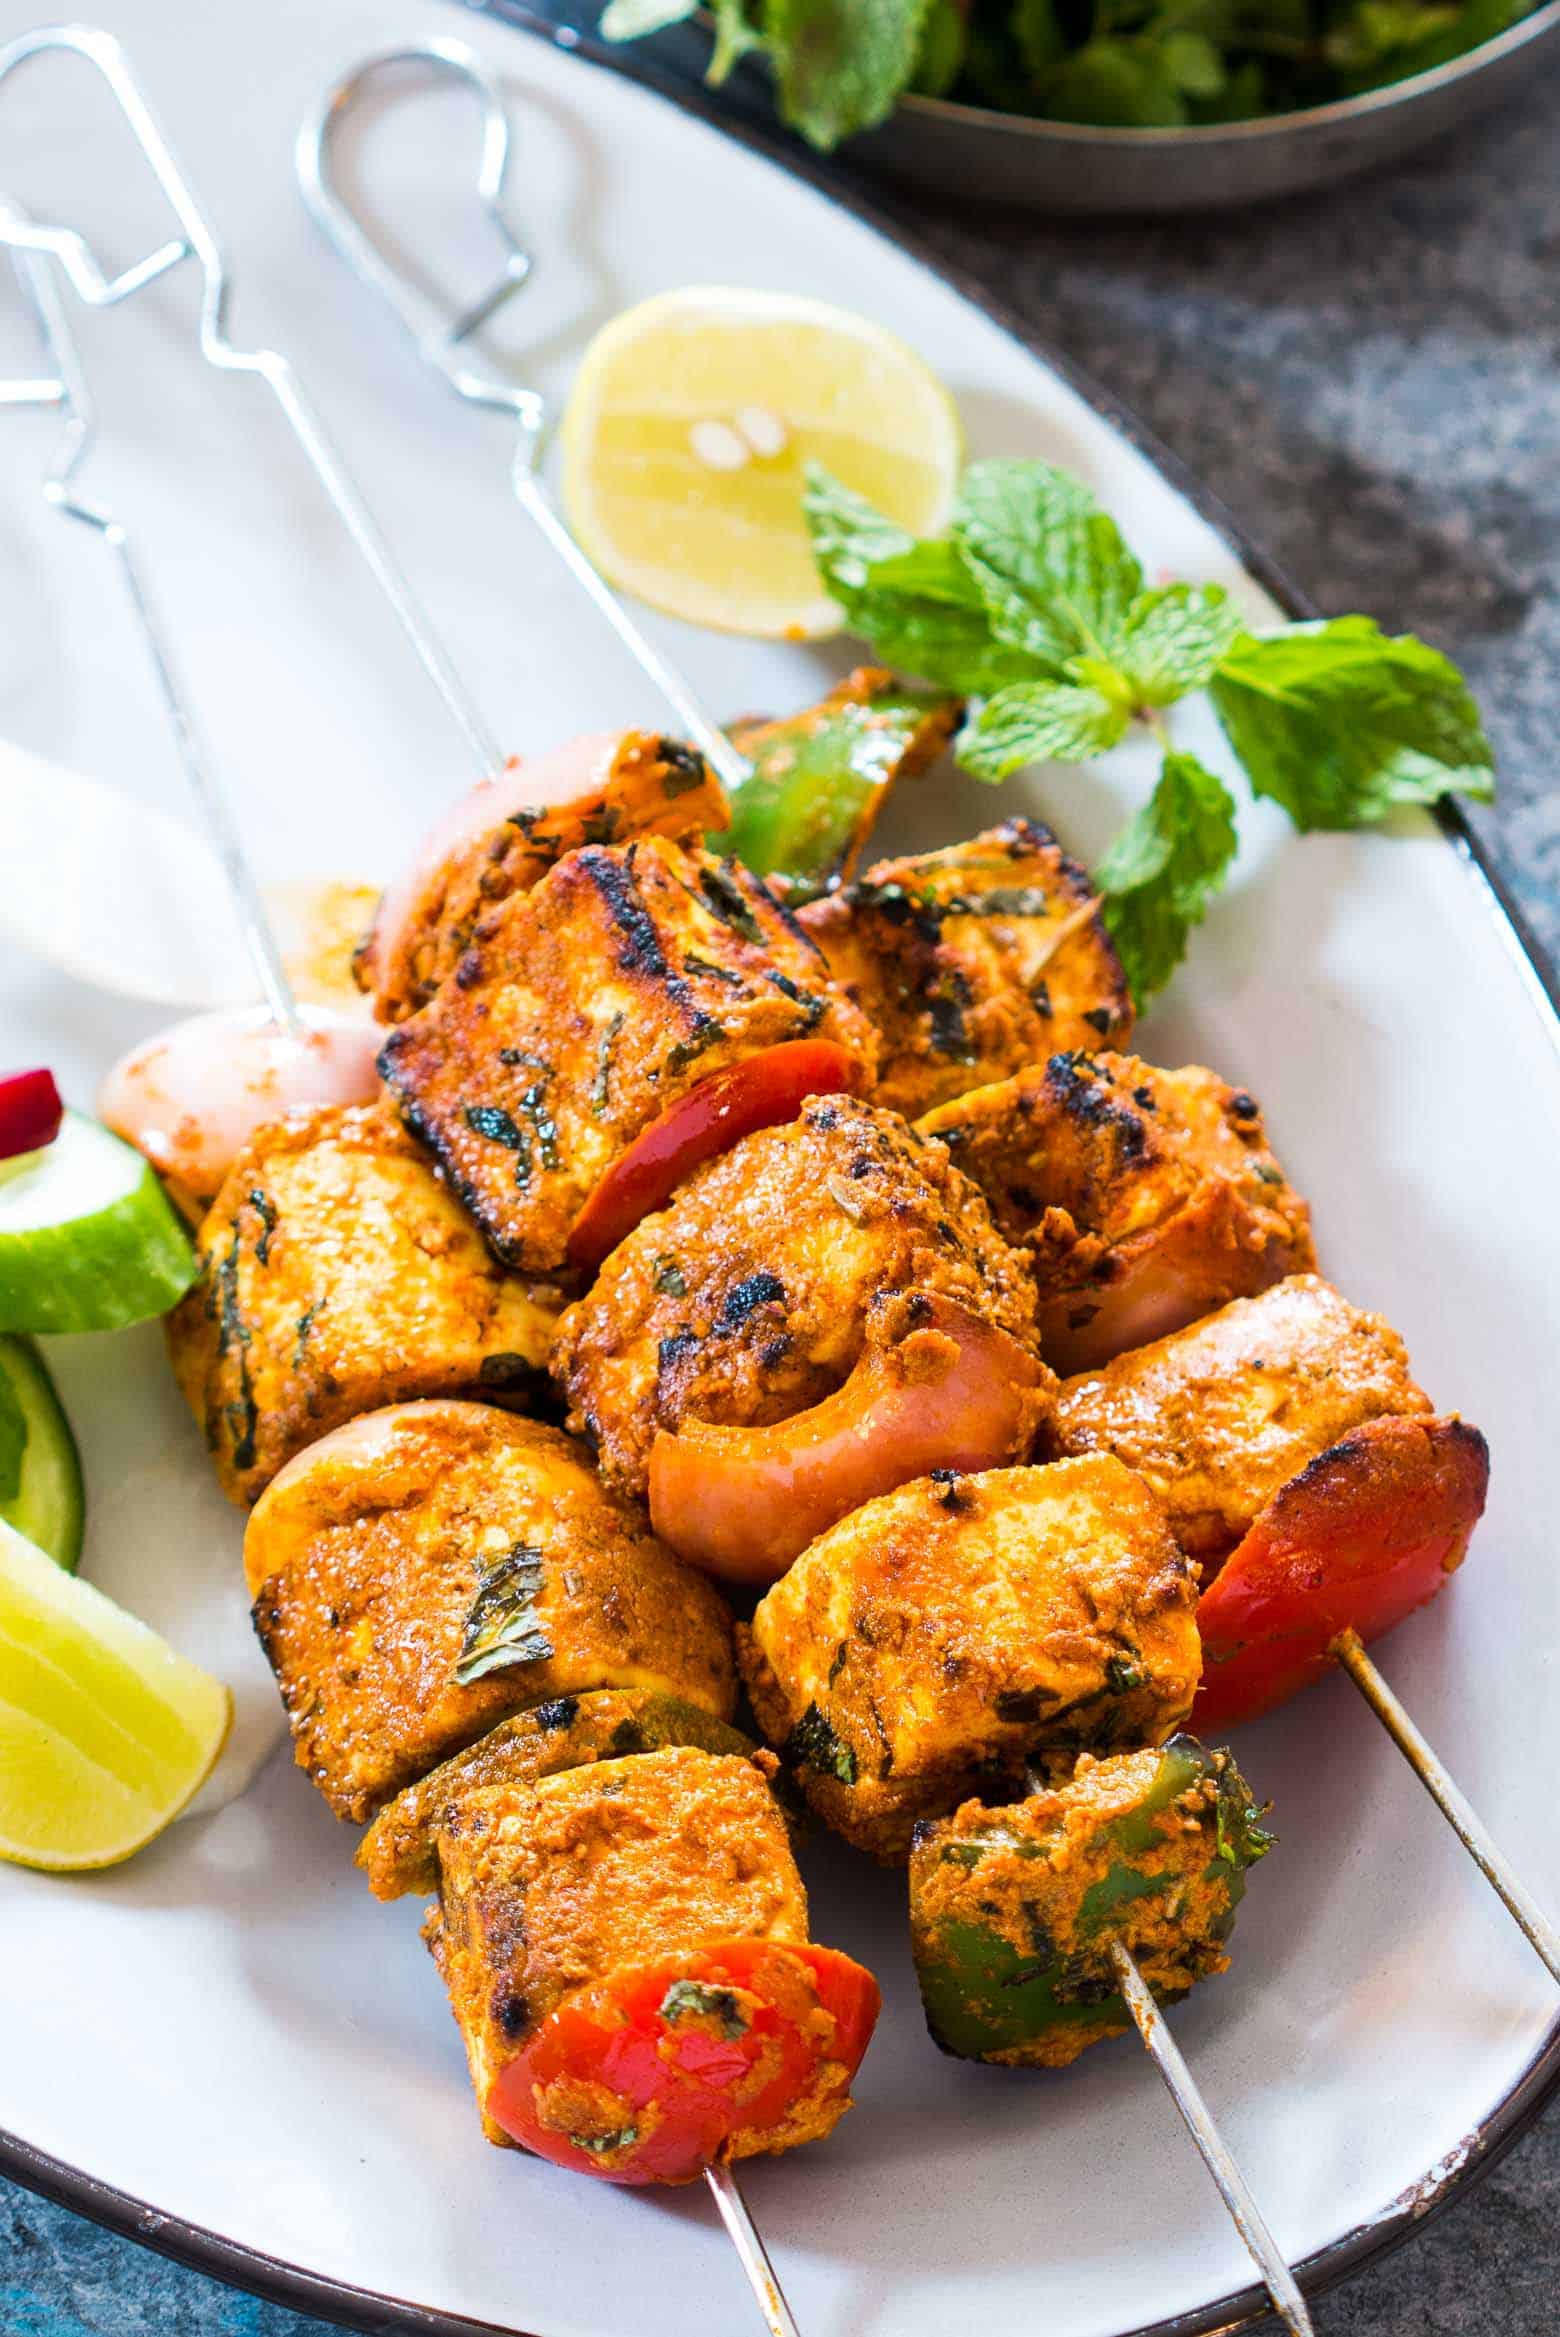 Plate of chicken kebabs with vegetables